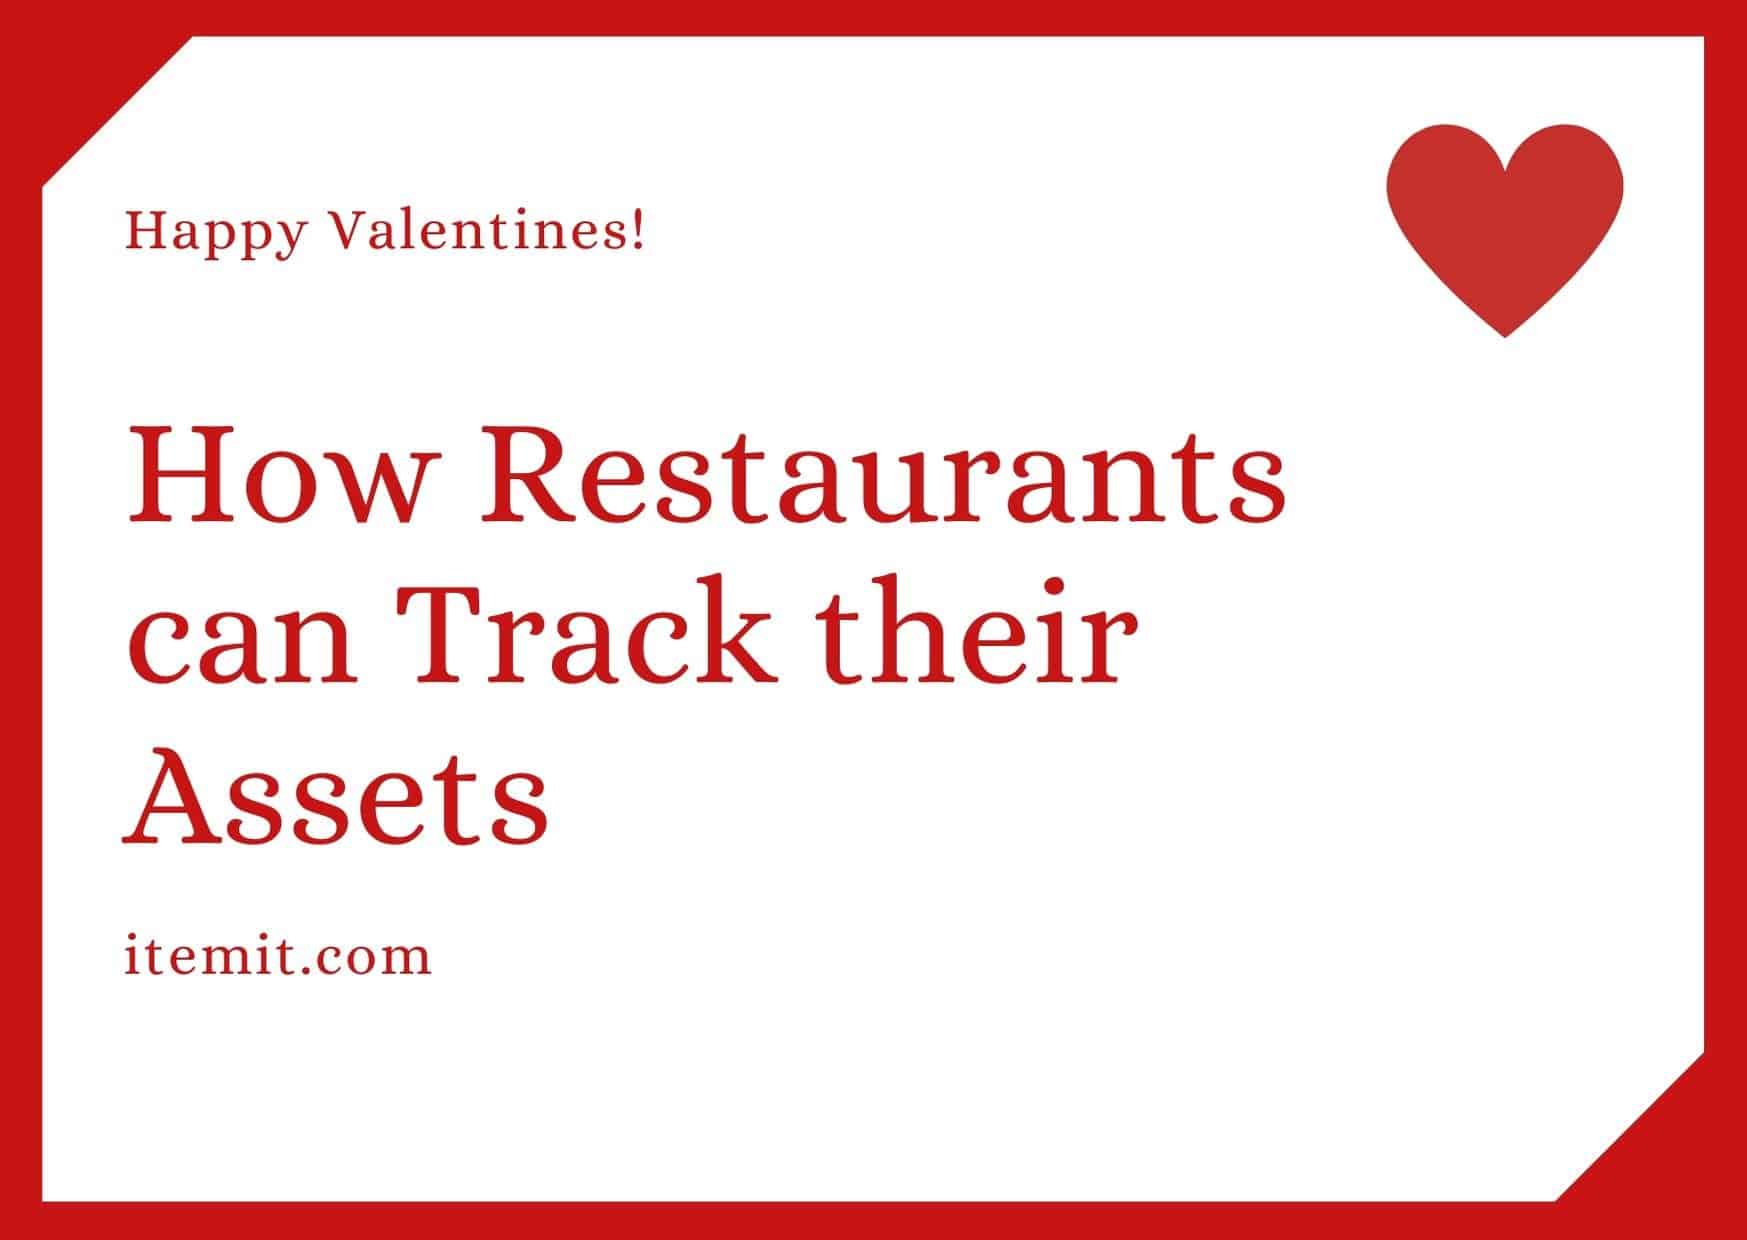 how restaurants can track their assets with asset tracking software